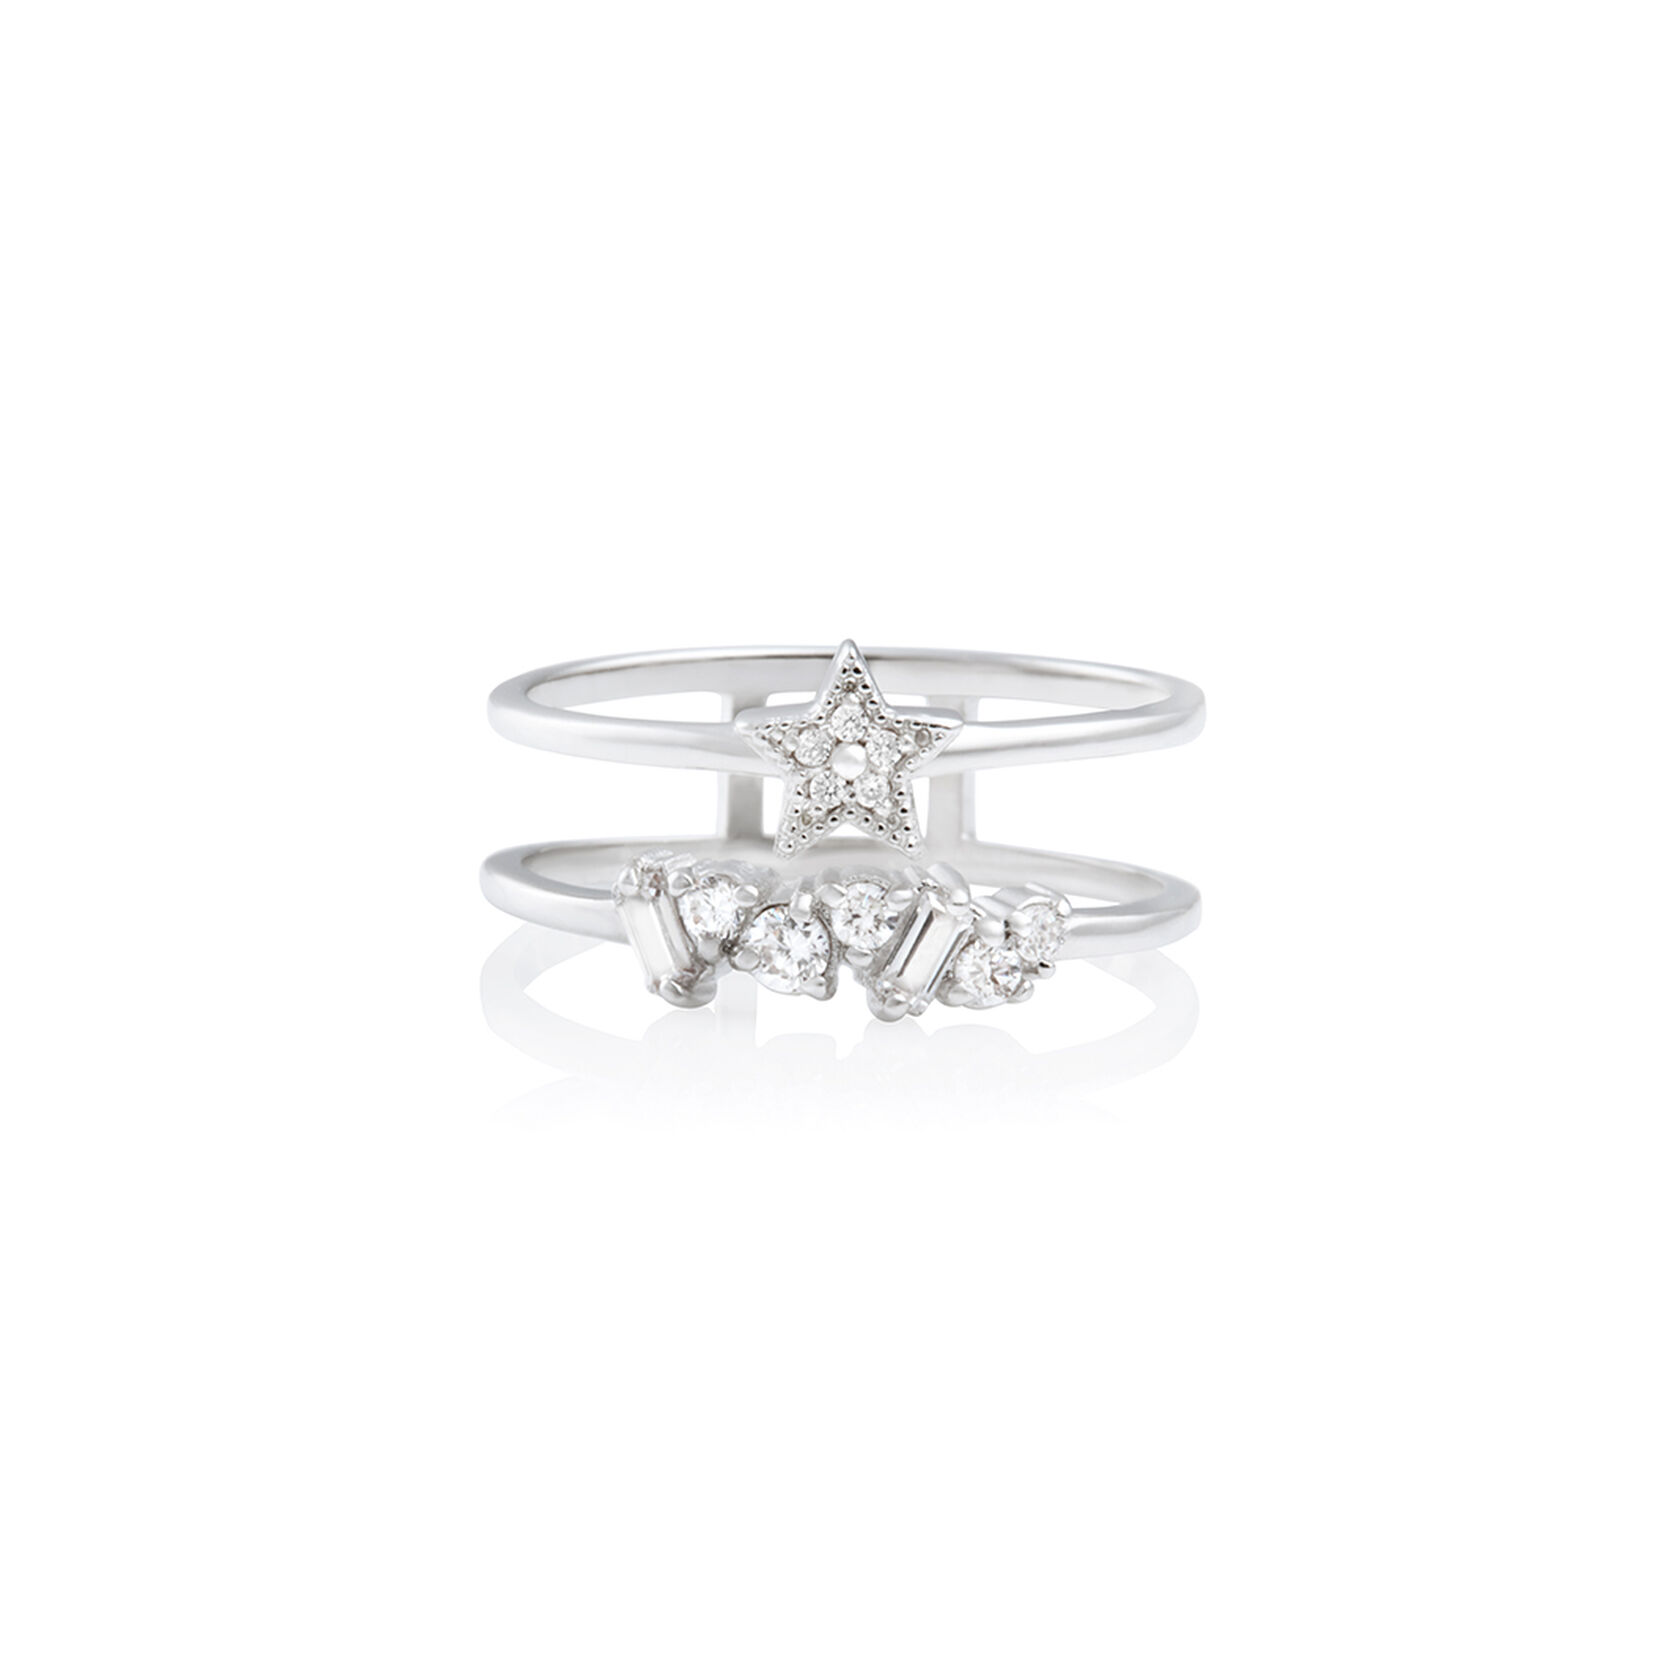 Celestial Silver Celestial Double Band Ring L